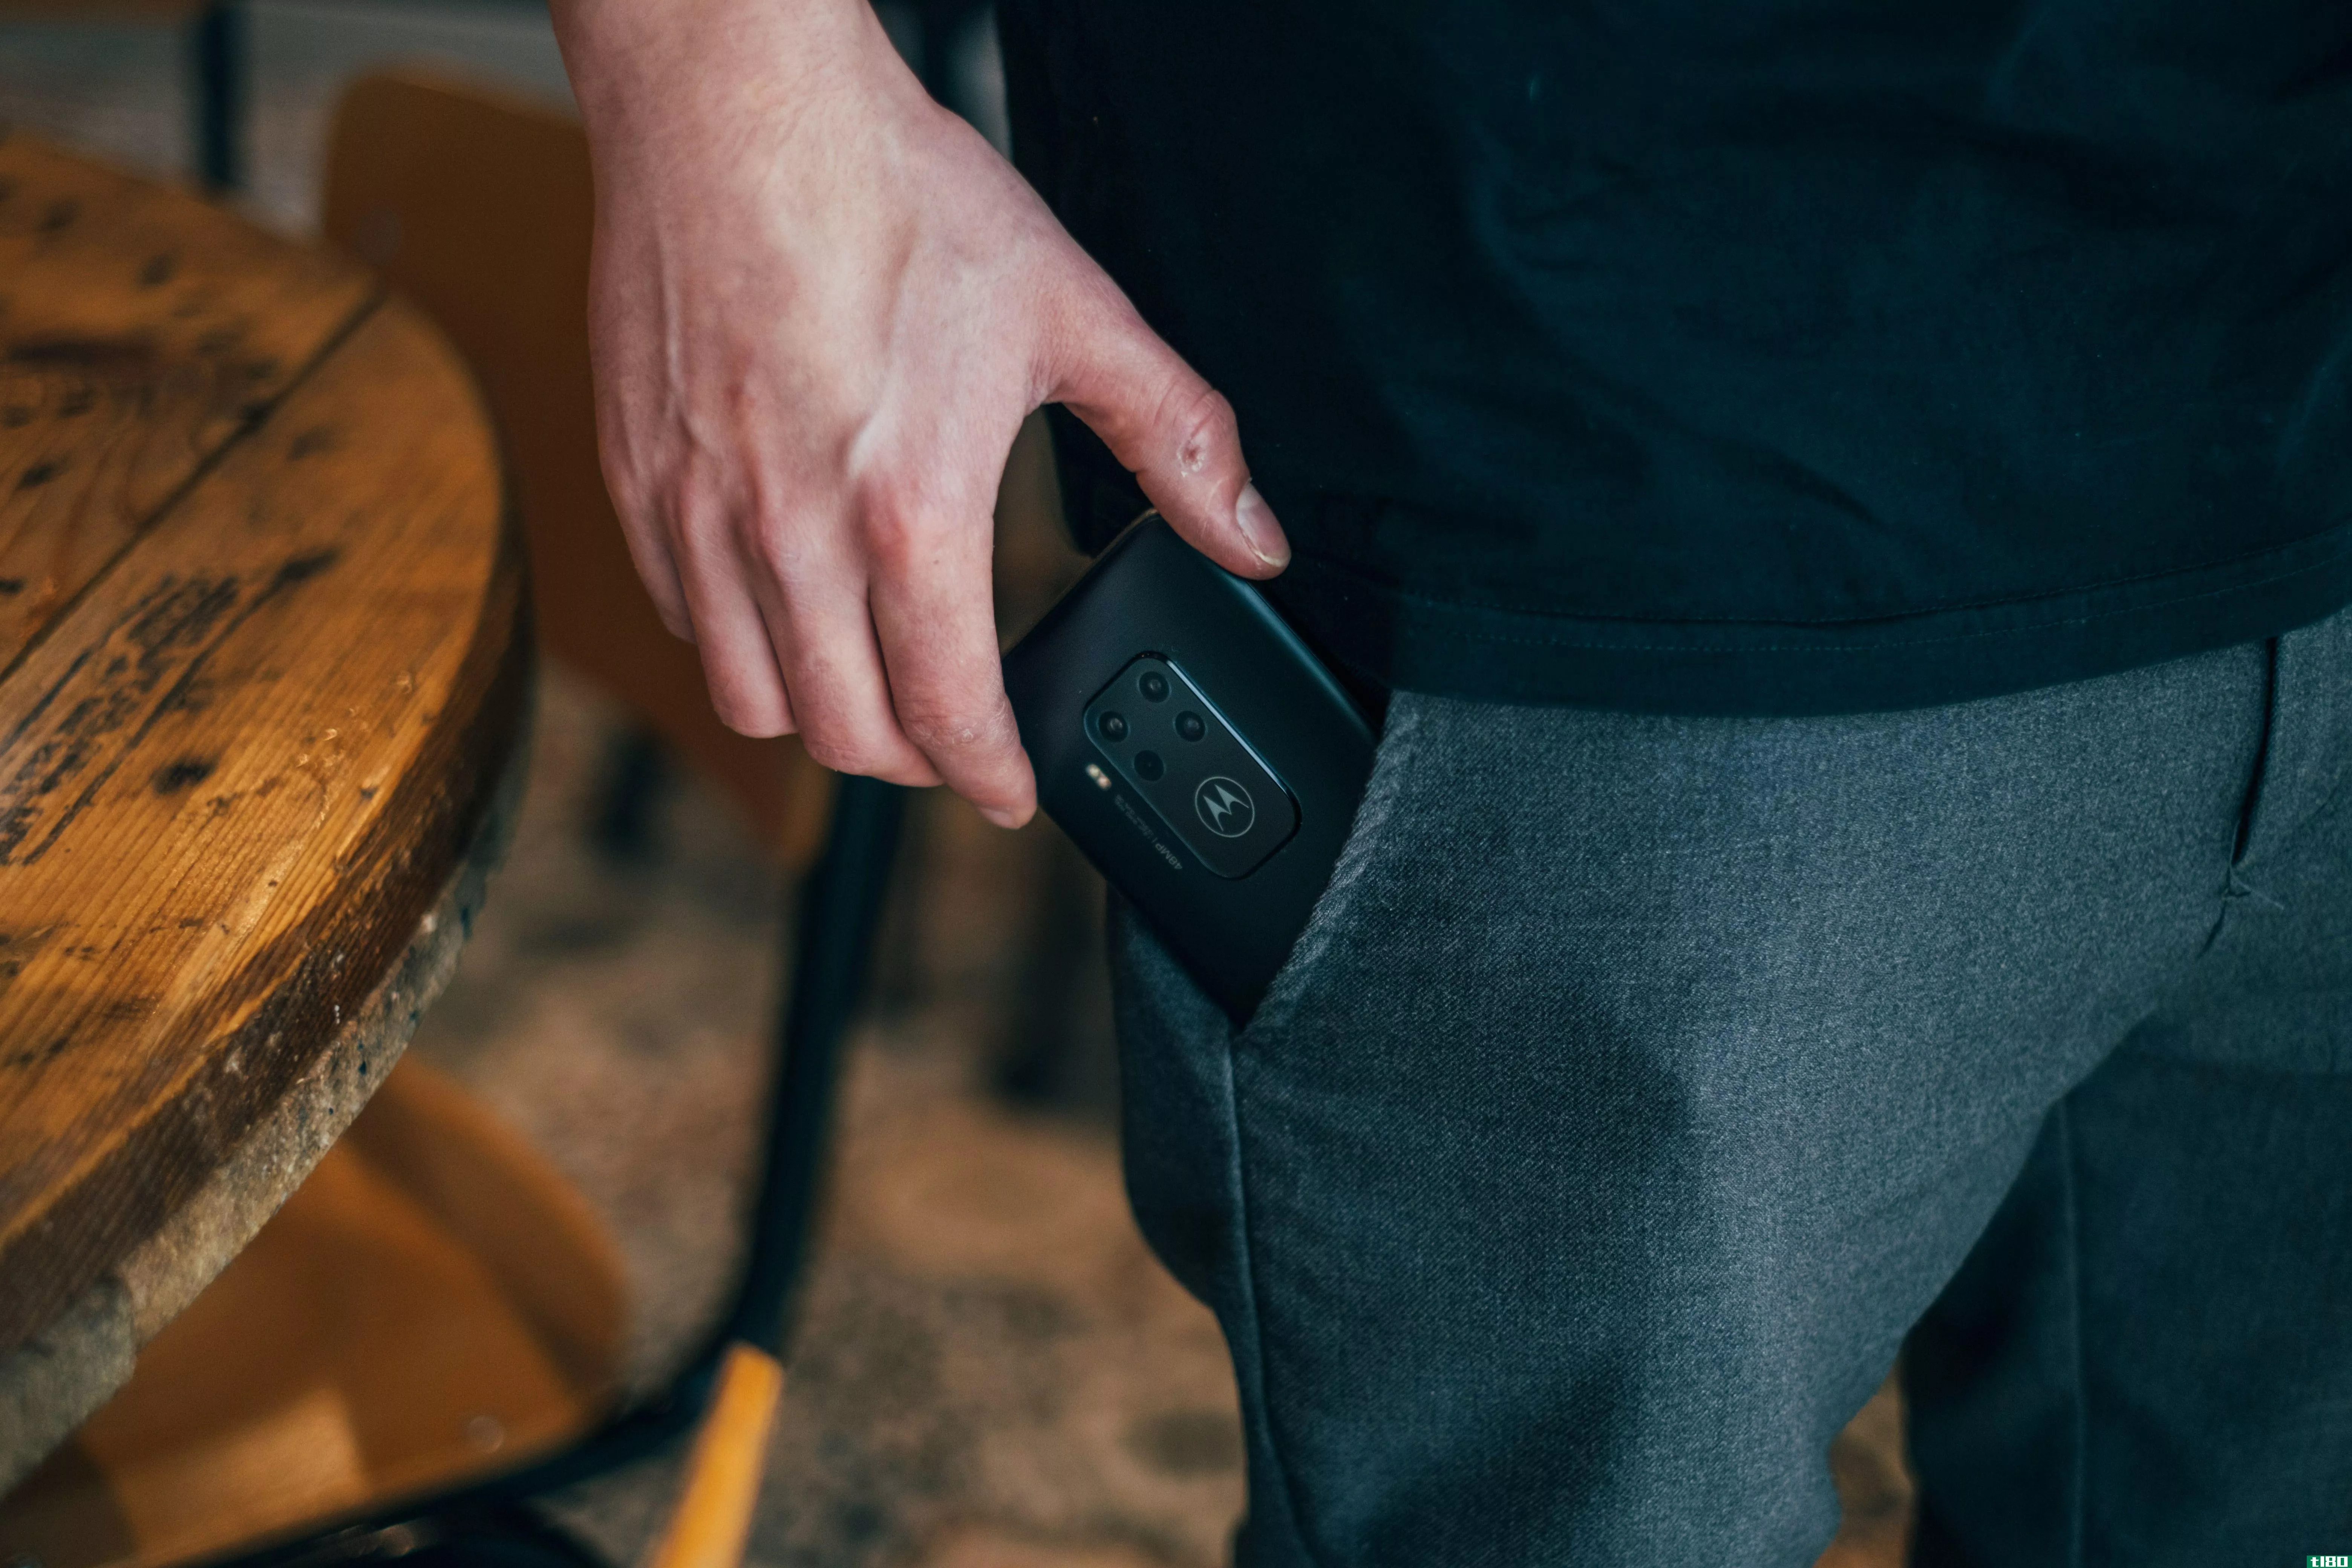 A Motorola phone being put into a pocket where lint and dust could accumulate inside the audio jack